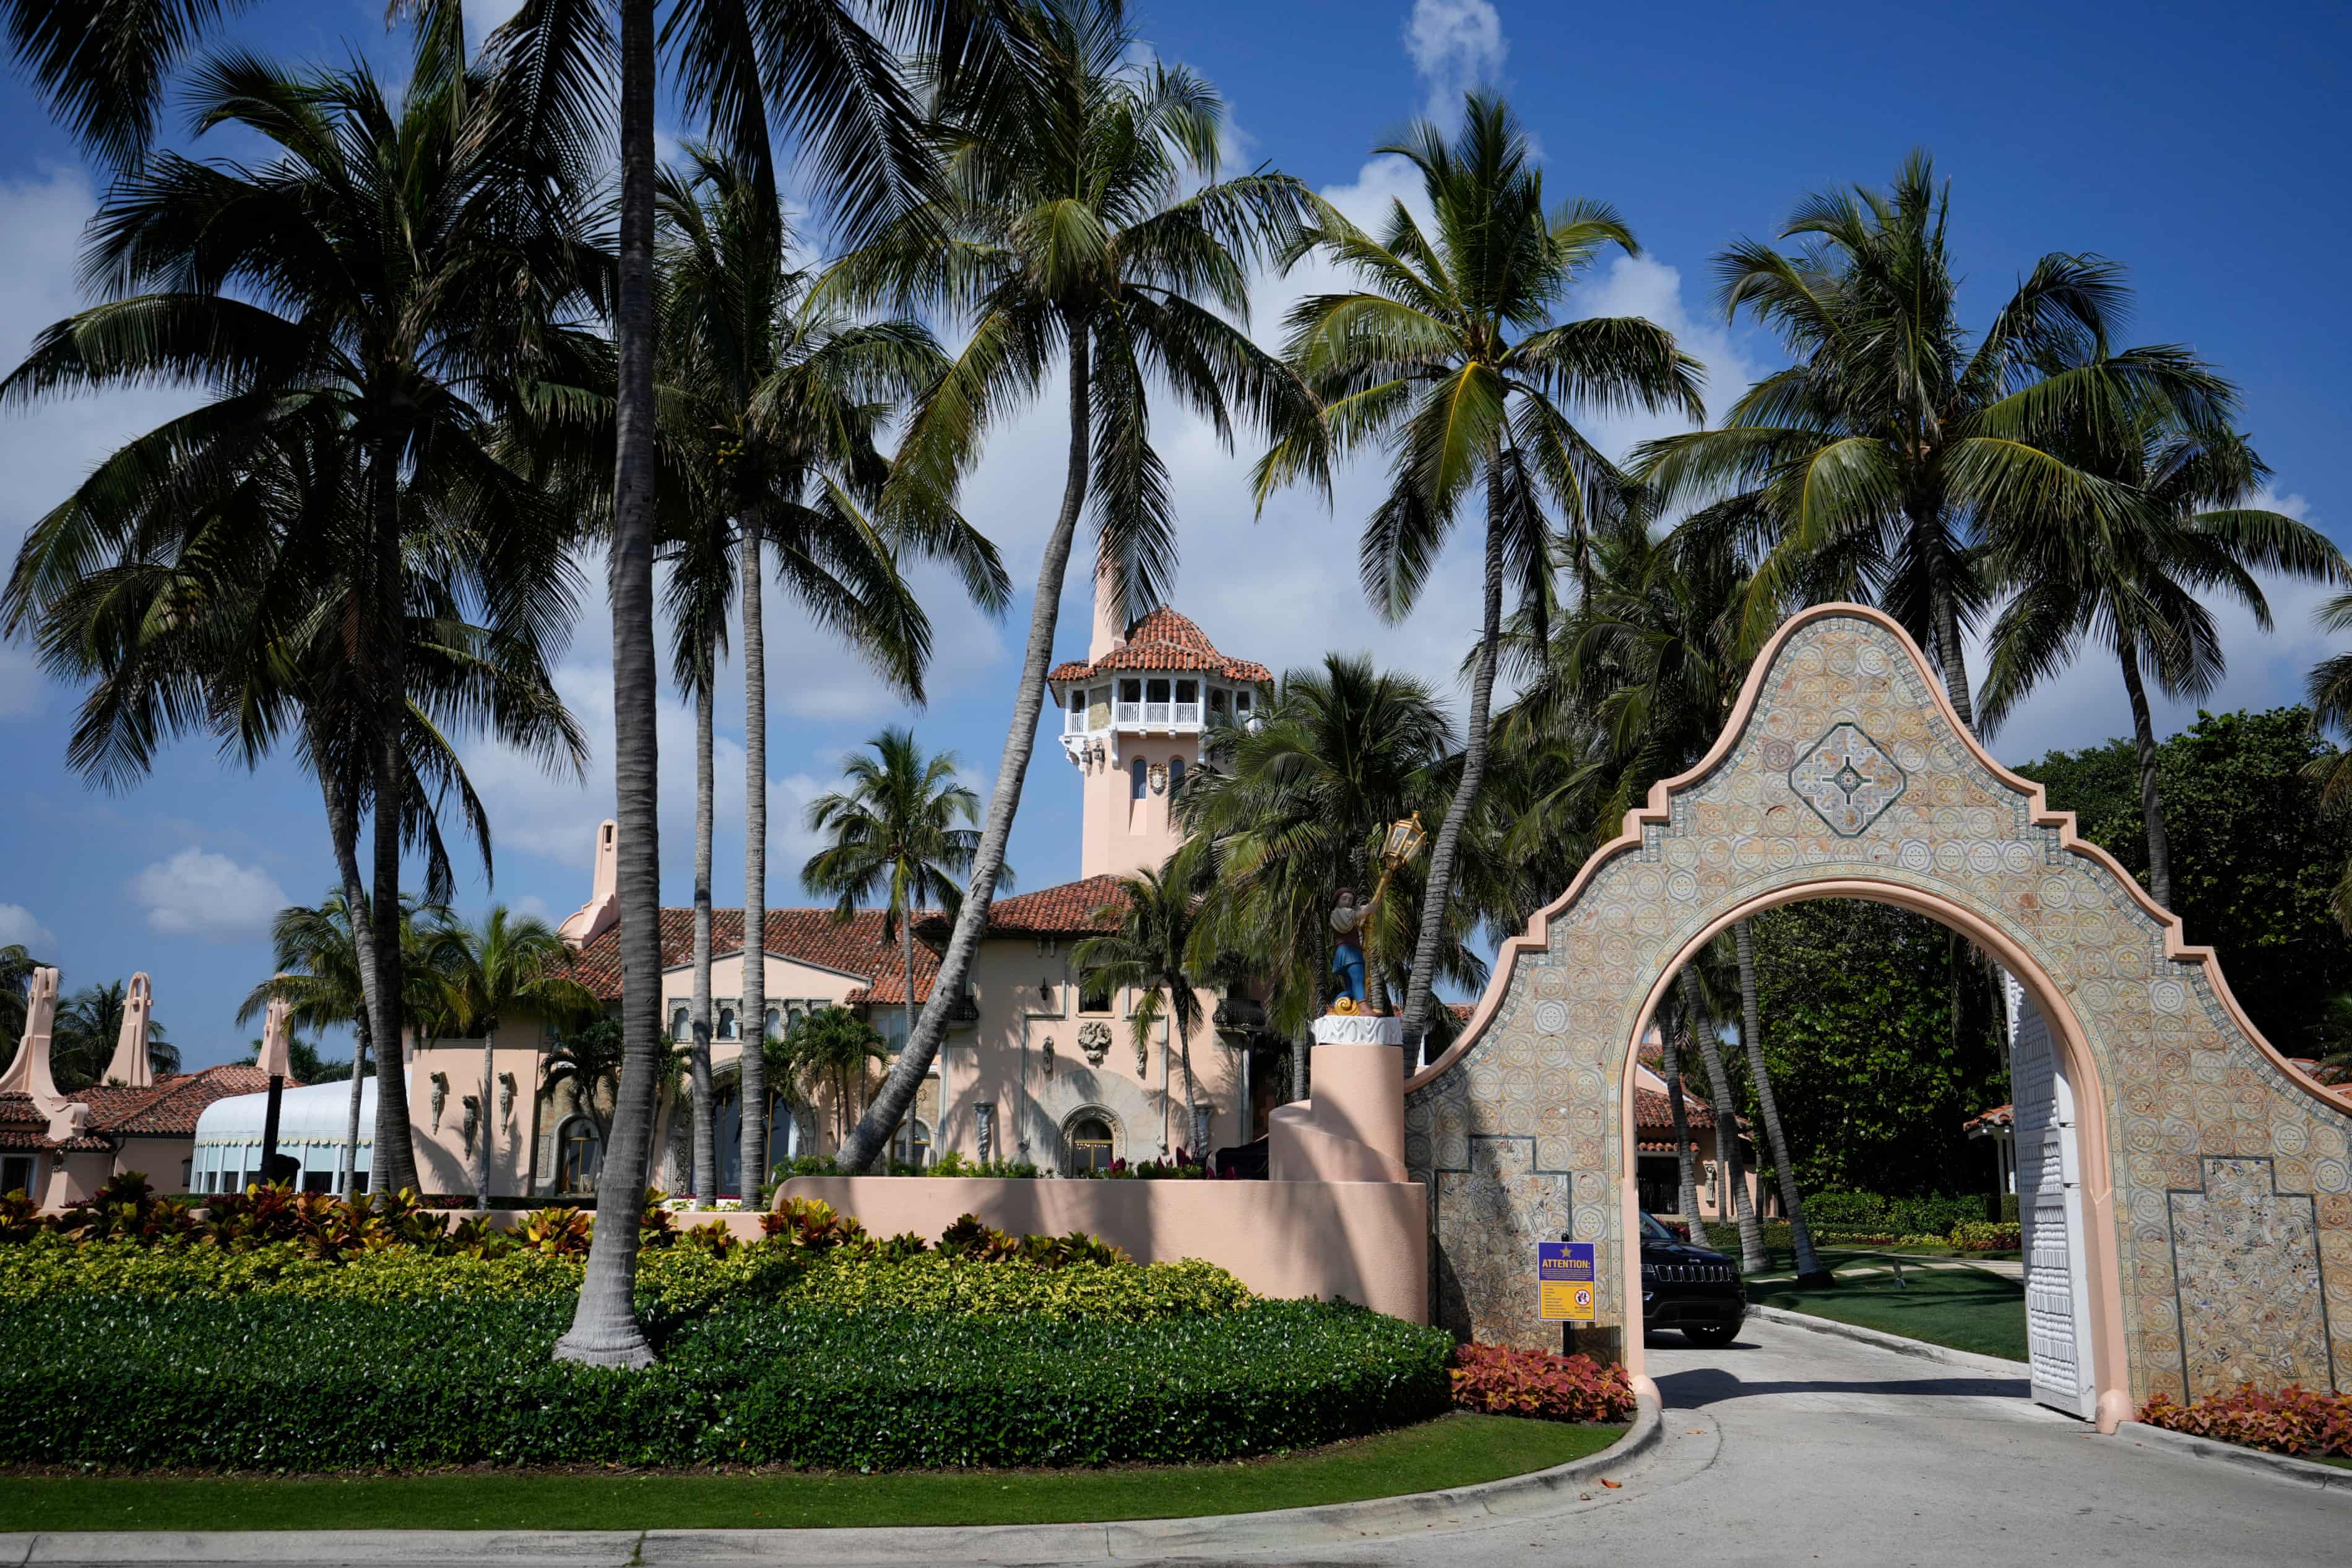 Judge scraps date for Trump Mar-a-Lago documents trial without rescheduling (theguardian.com)